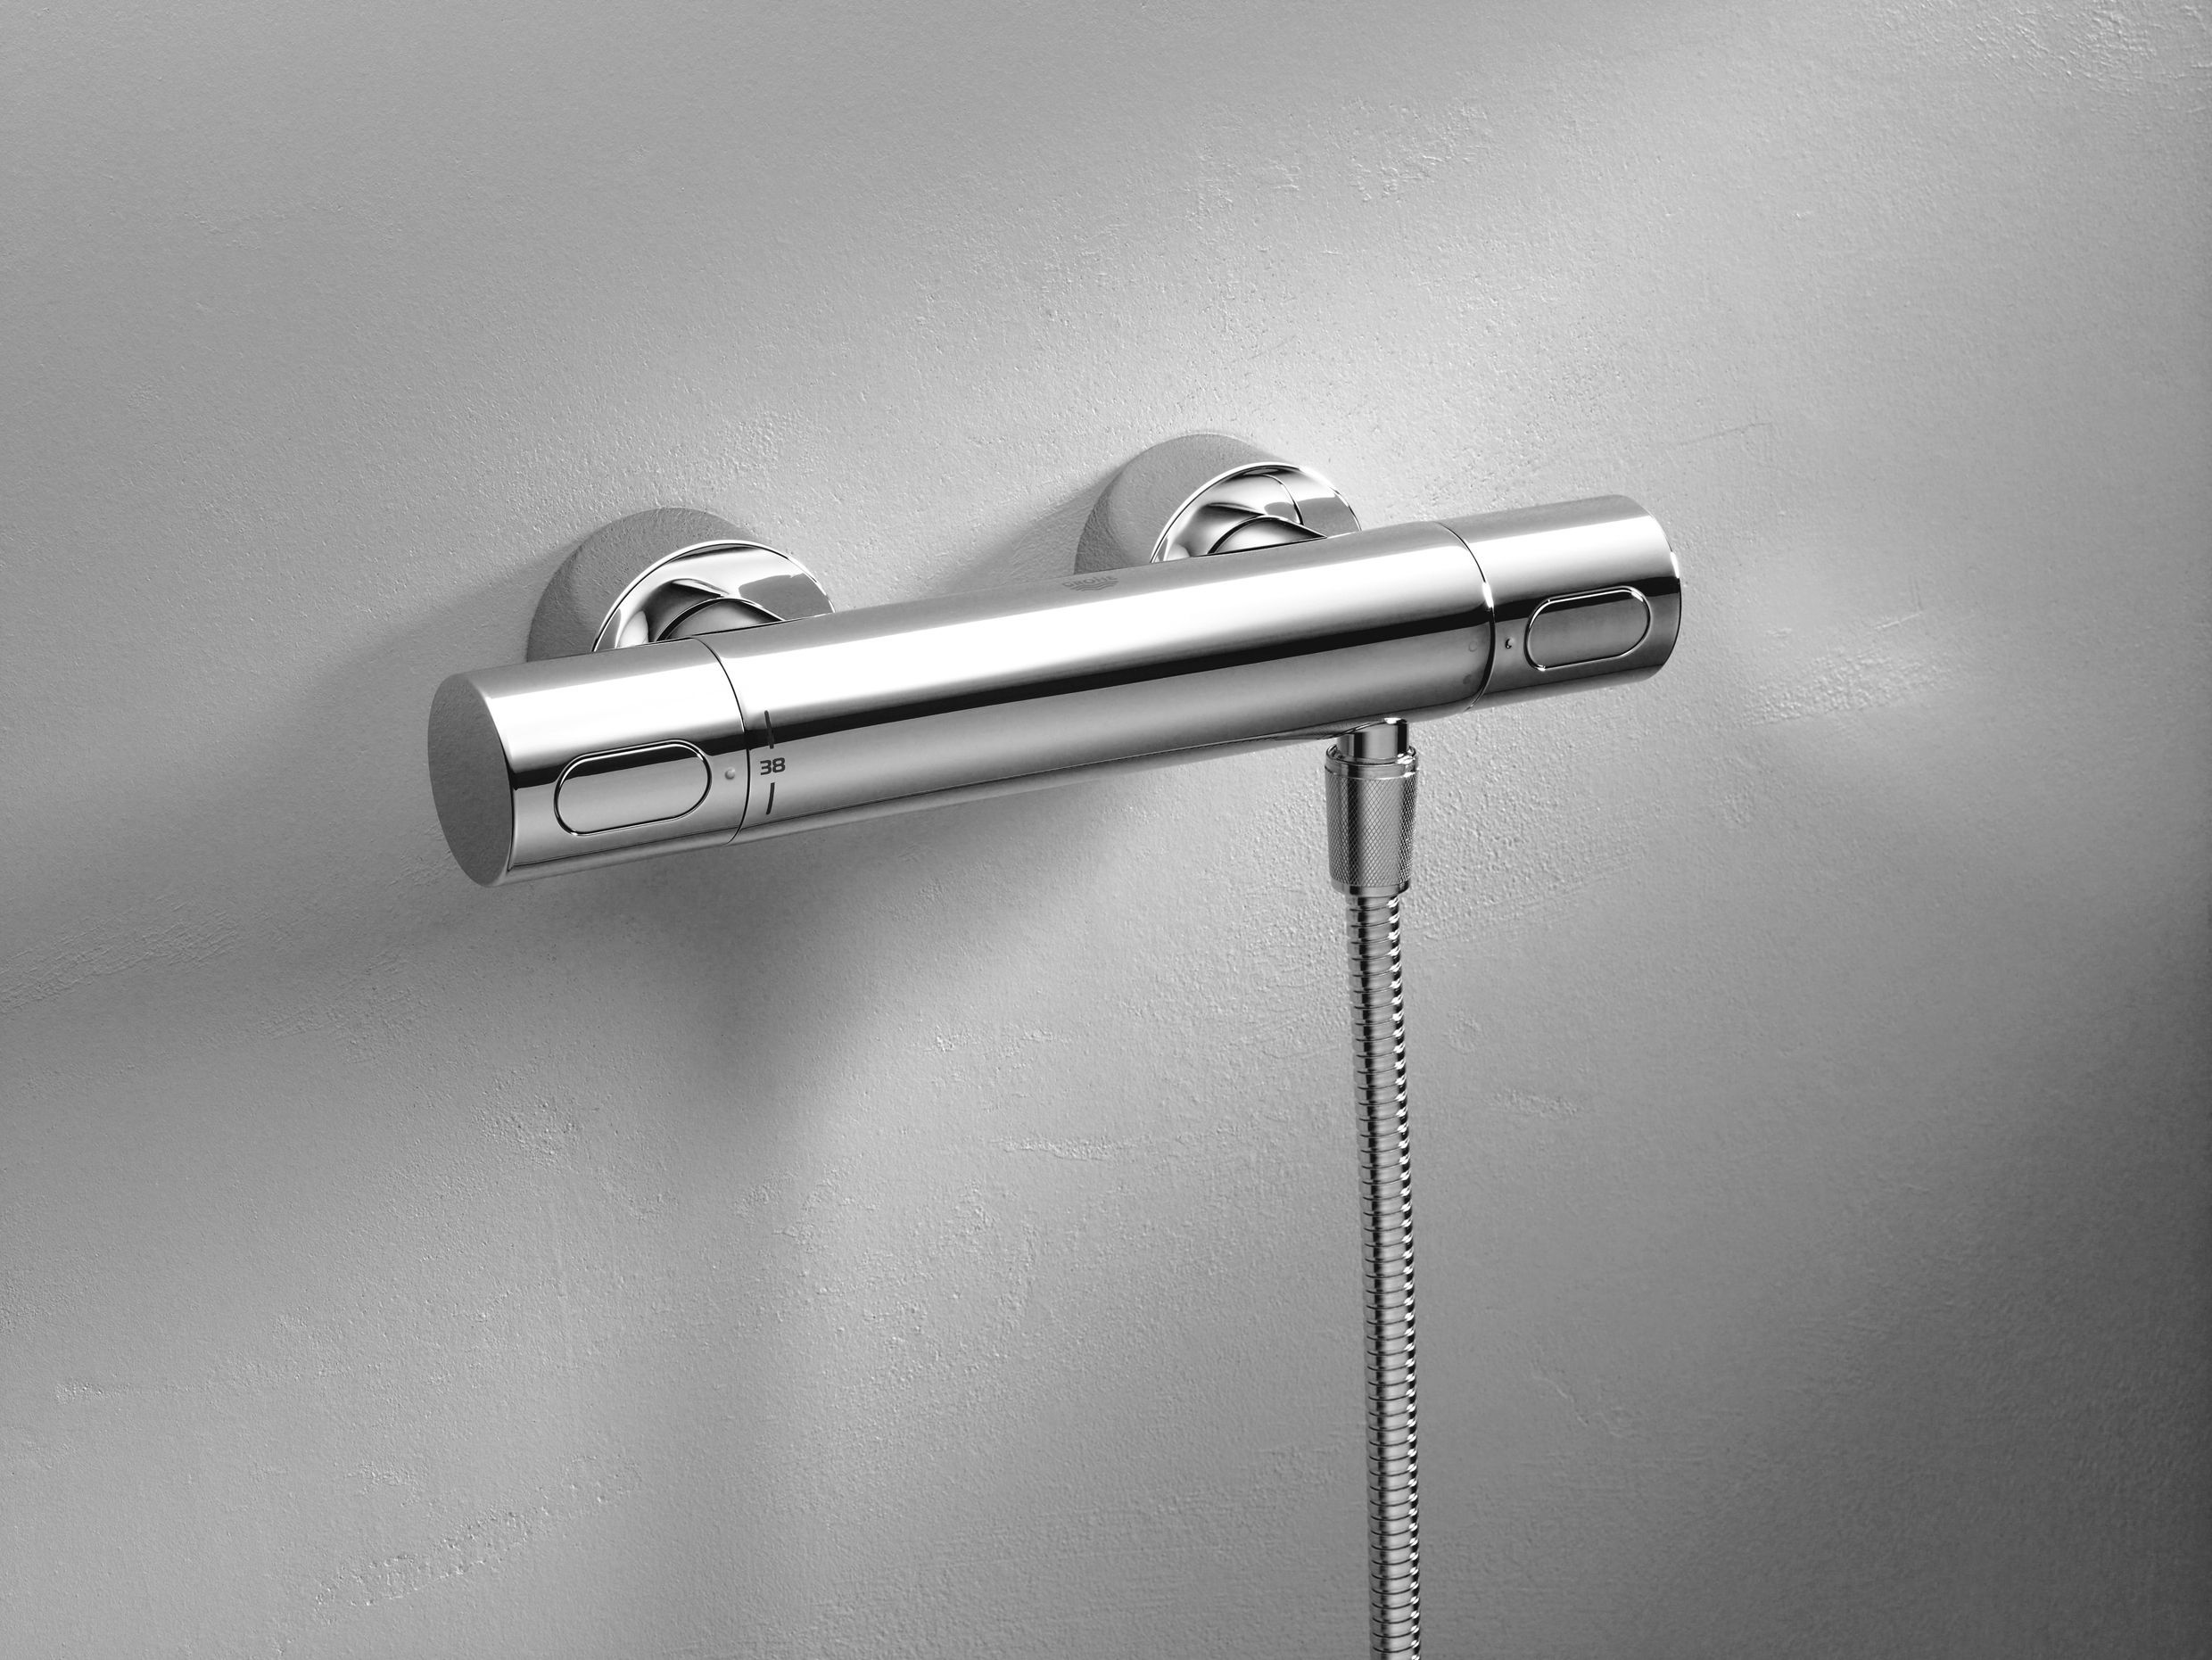 Душа grohe grohtherm. Grohe Grohtherm 3000 Cosmopolitan. Grohe Grohtherm 3000 Cosmopolitan 19467000. Смеситель для душа с термостатом Grohe. Термостат 3000 Грое для душа.